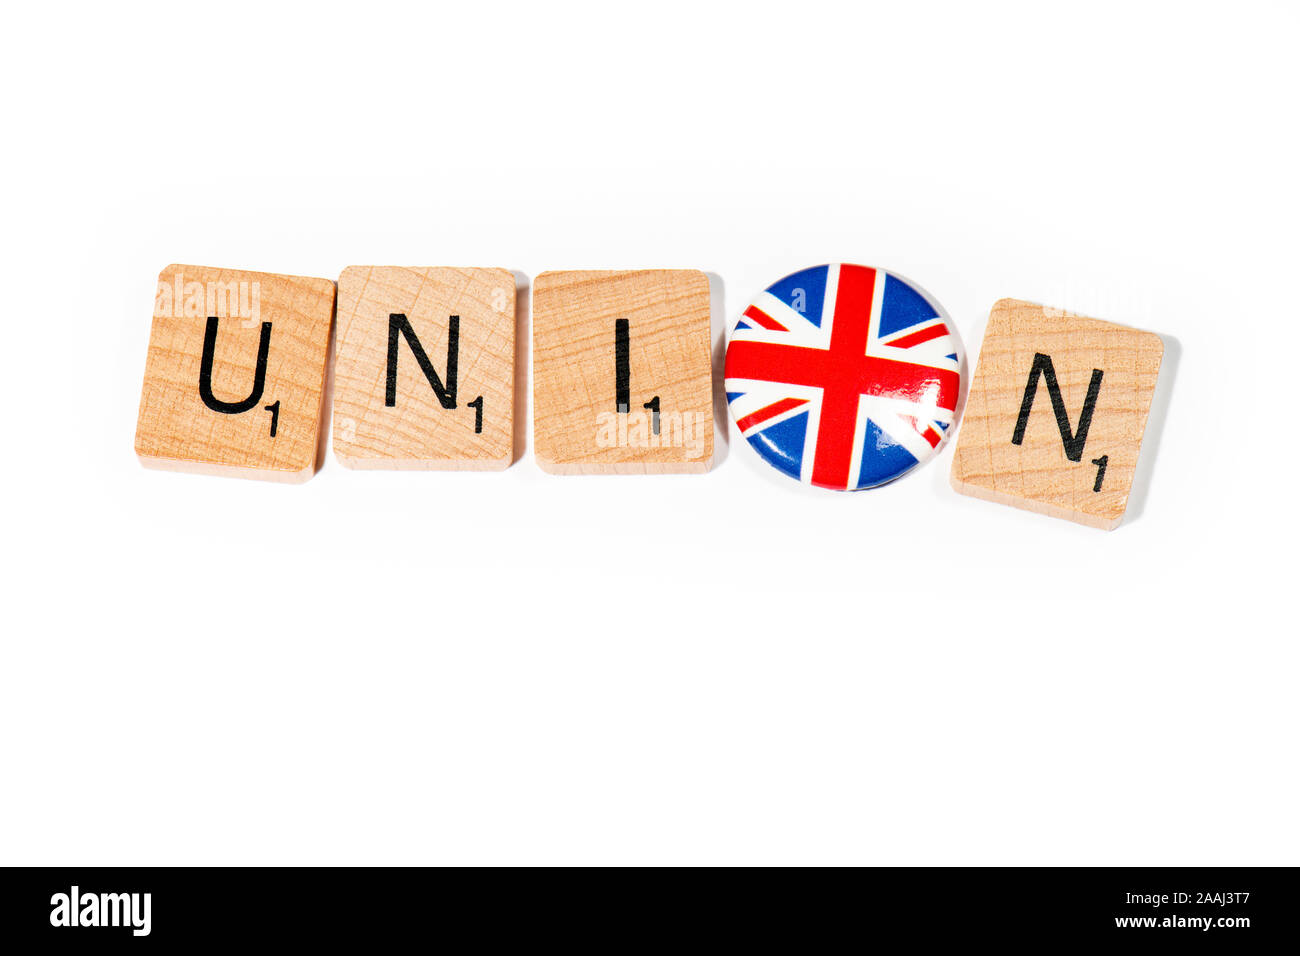 Conceptual: Scrabble letters spell out UNION with a Union Flag pin badge as the O. Stock Photo